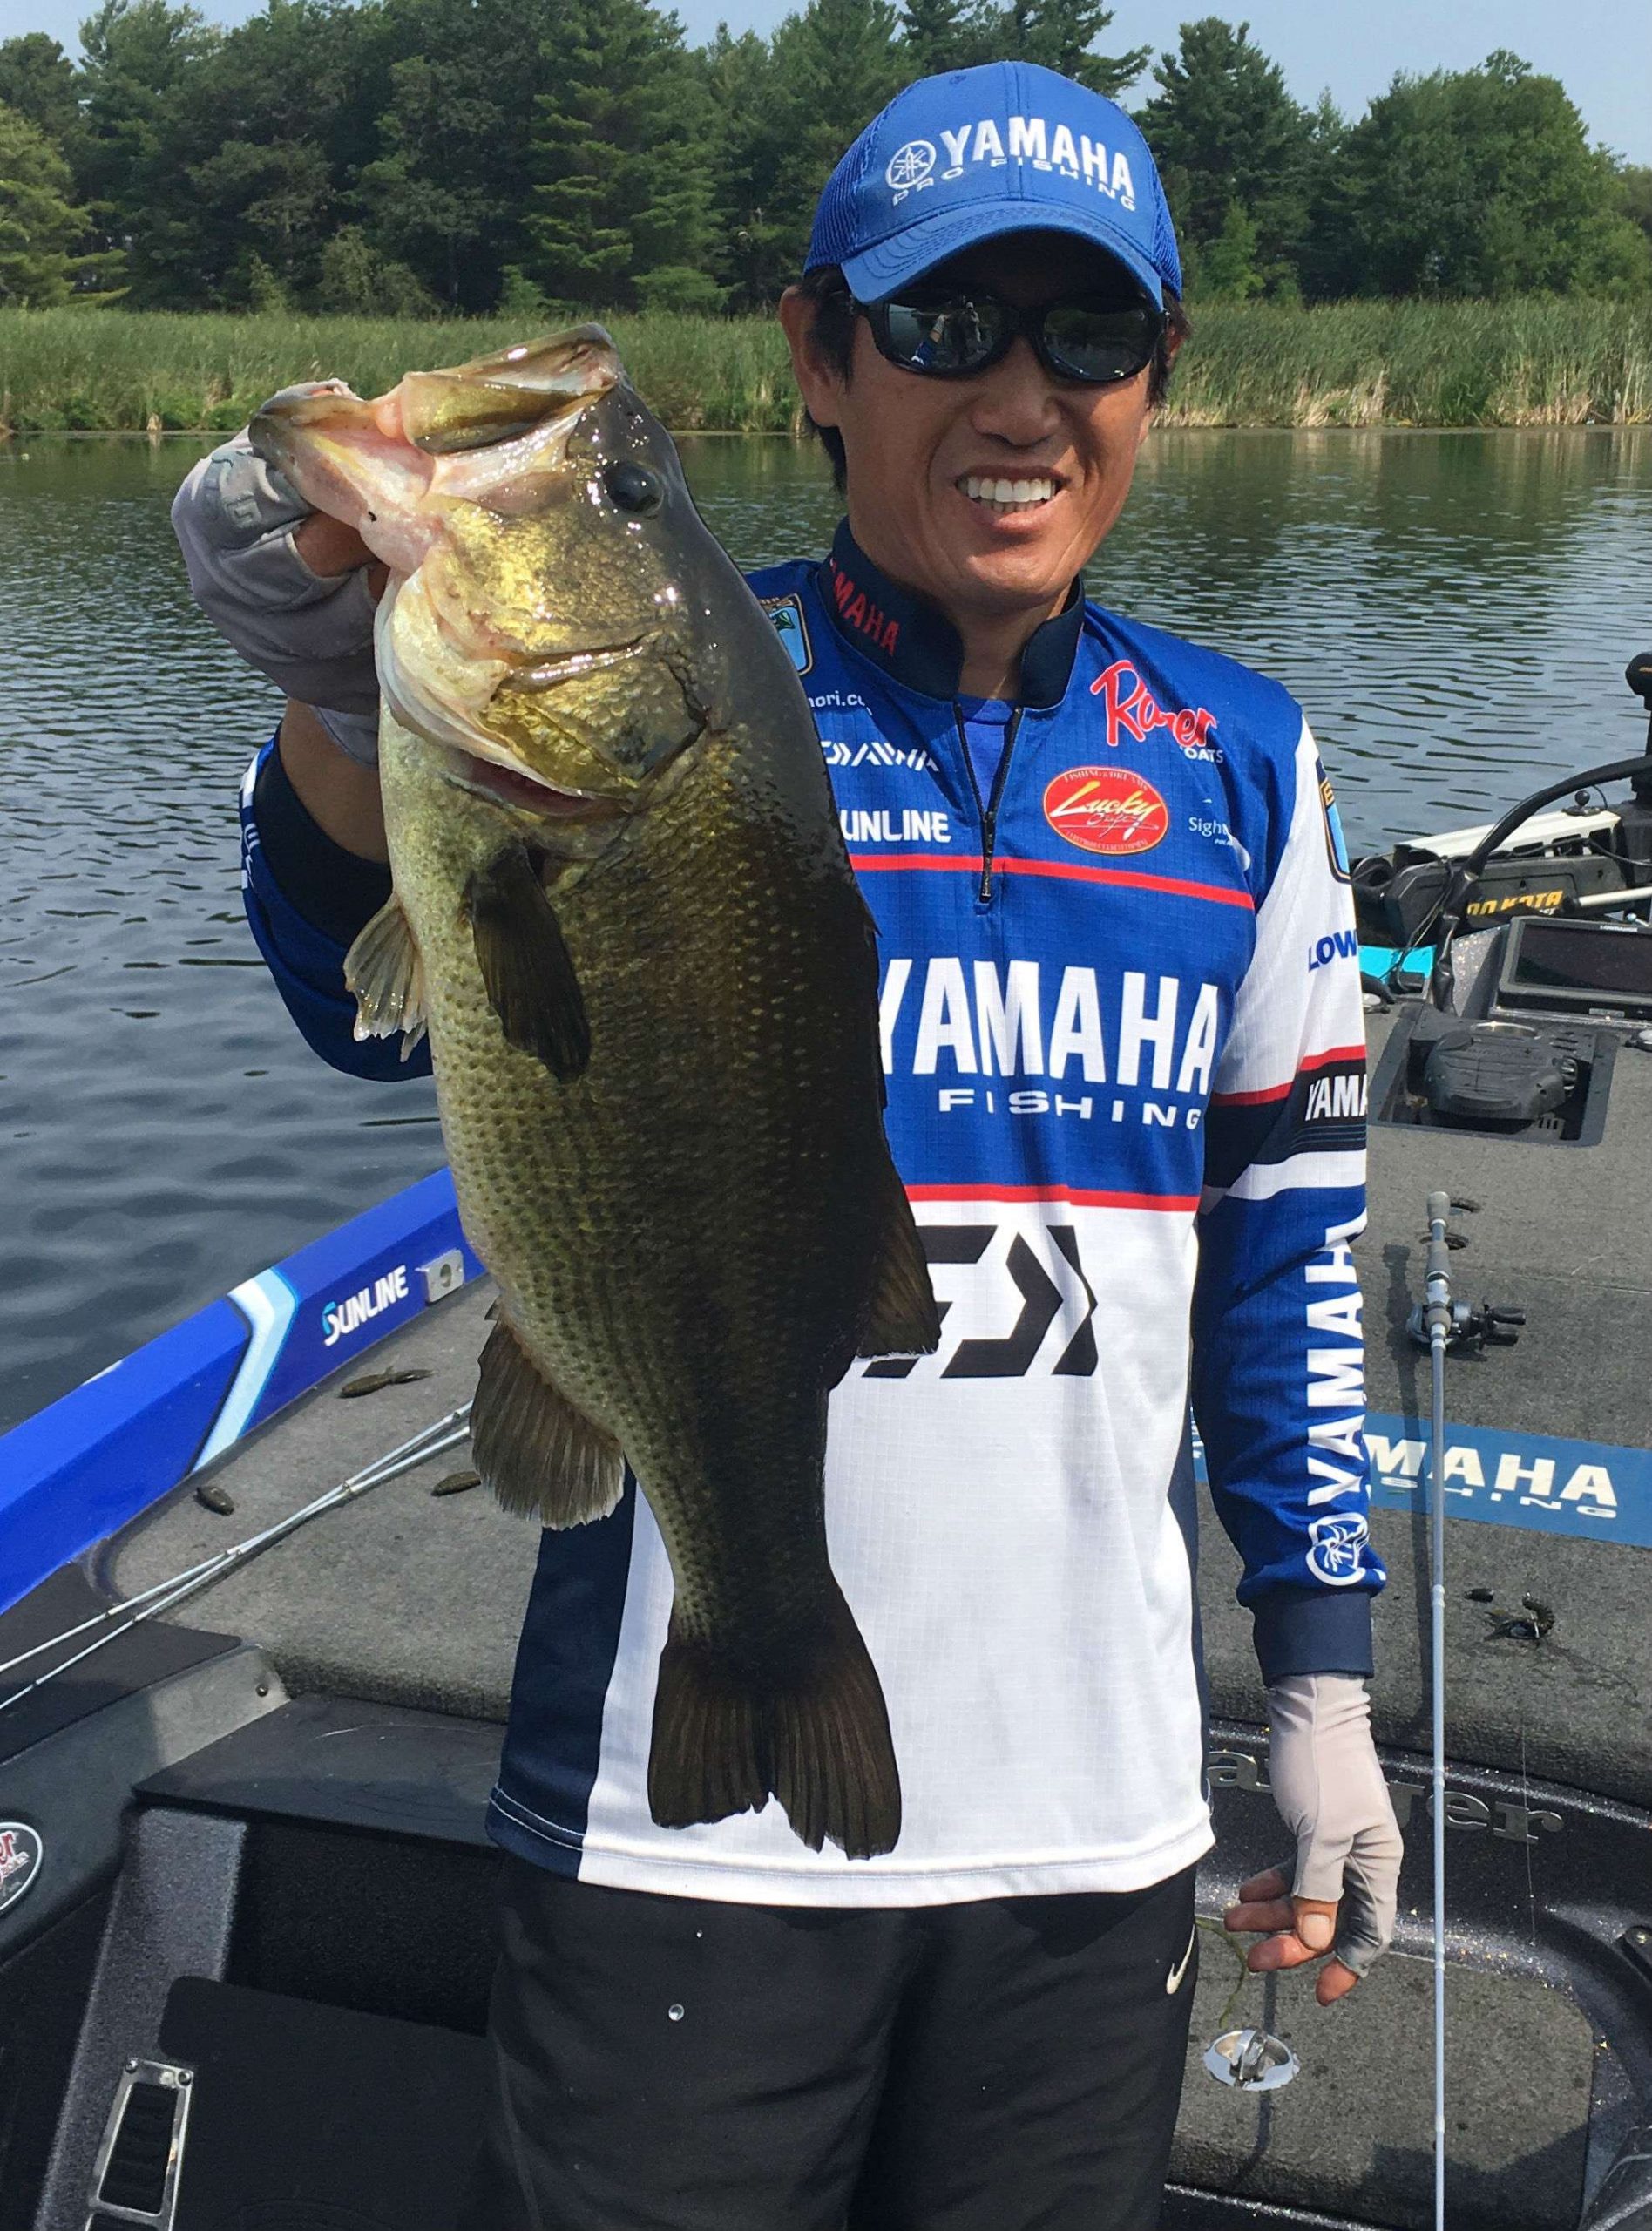 Takahiro just put a 5-pounder in the livewell. Out came a 2 1/2. Nice cull! Perfect conditions for a good bag, sun, light breeze, this could get interesting.